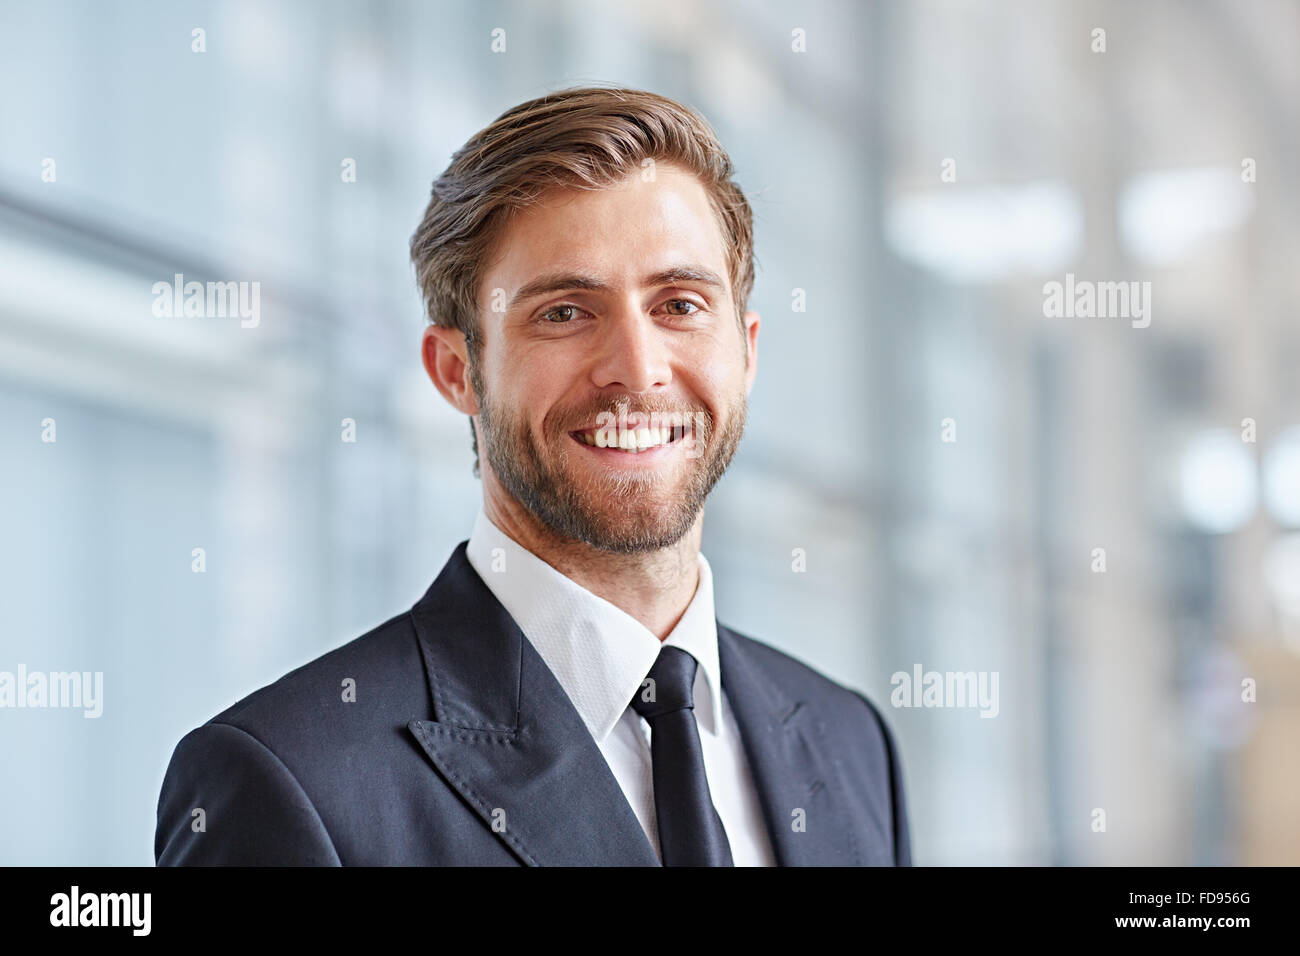 Feeling great about my corporate choices Stock Photo